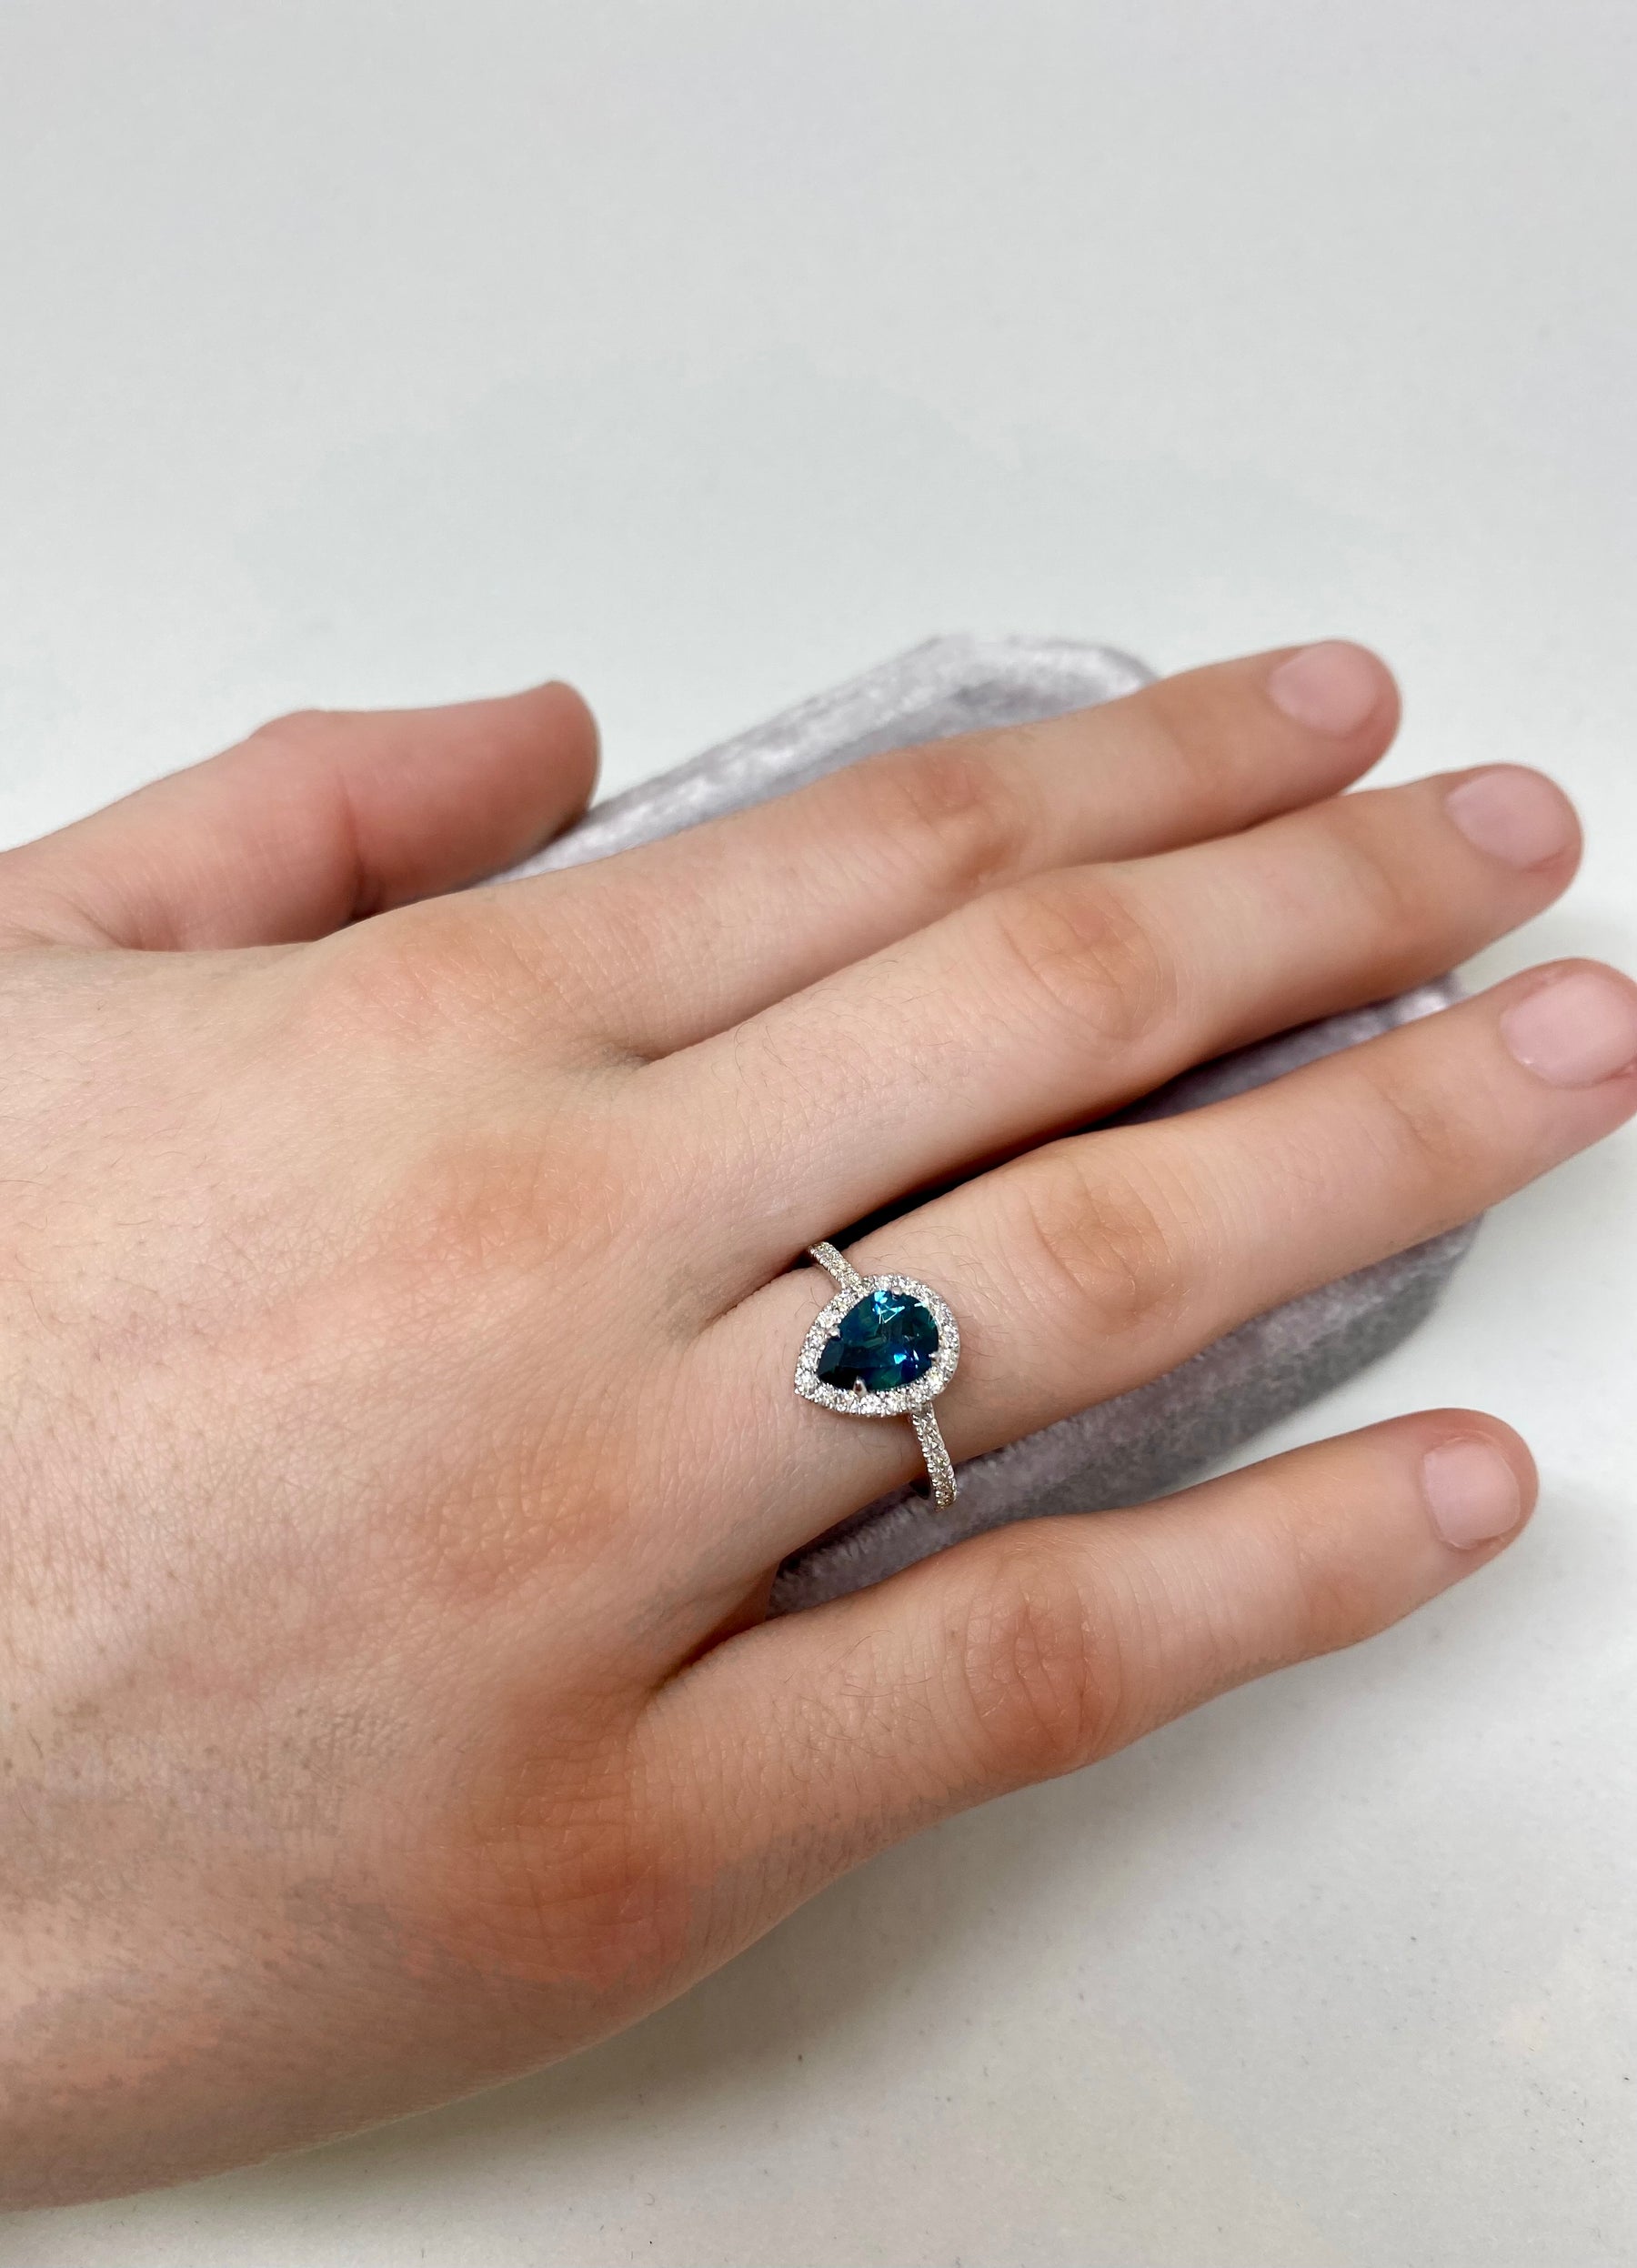 Teal Blue Montana Sapphire - Pear Shaped -Alternative Engagement Ring